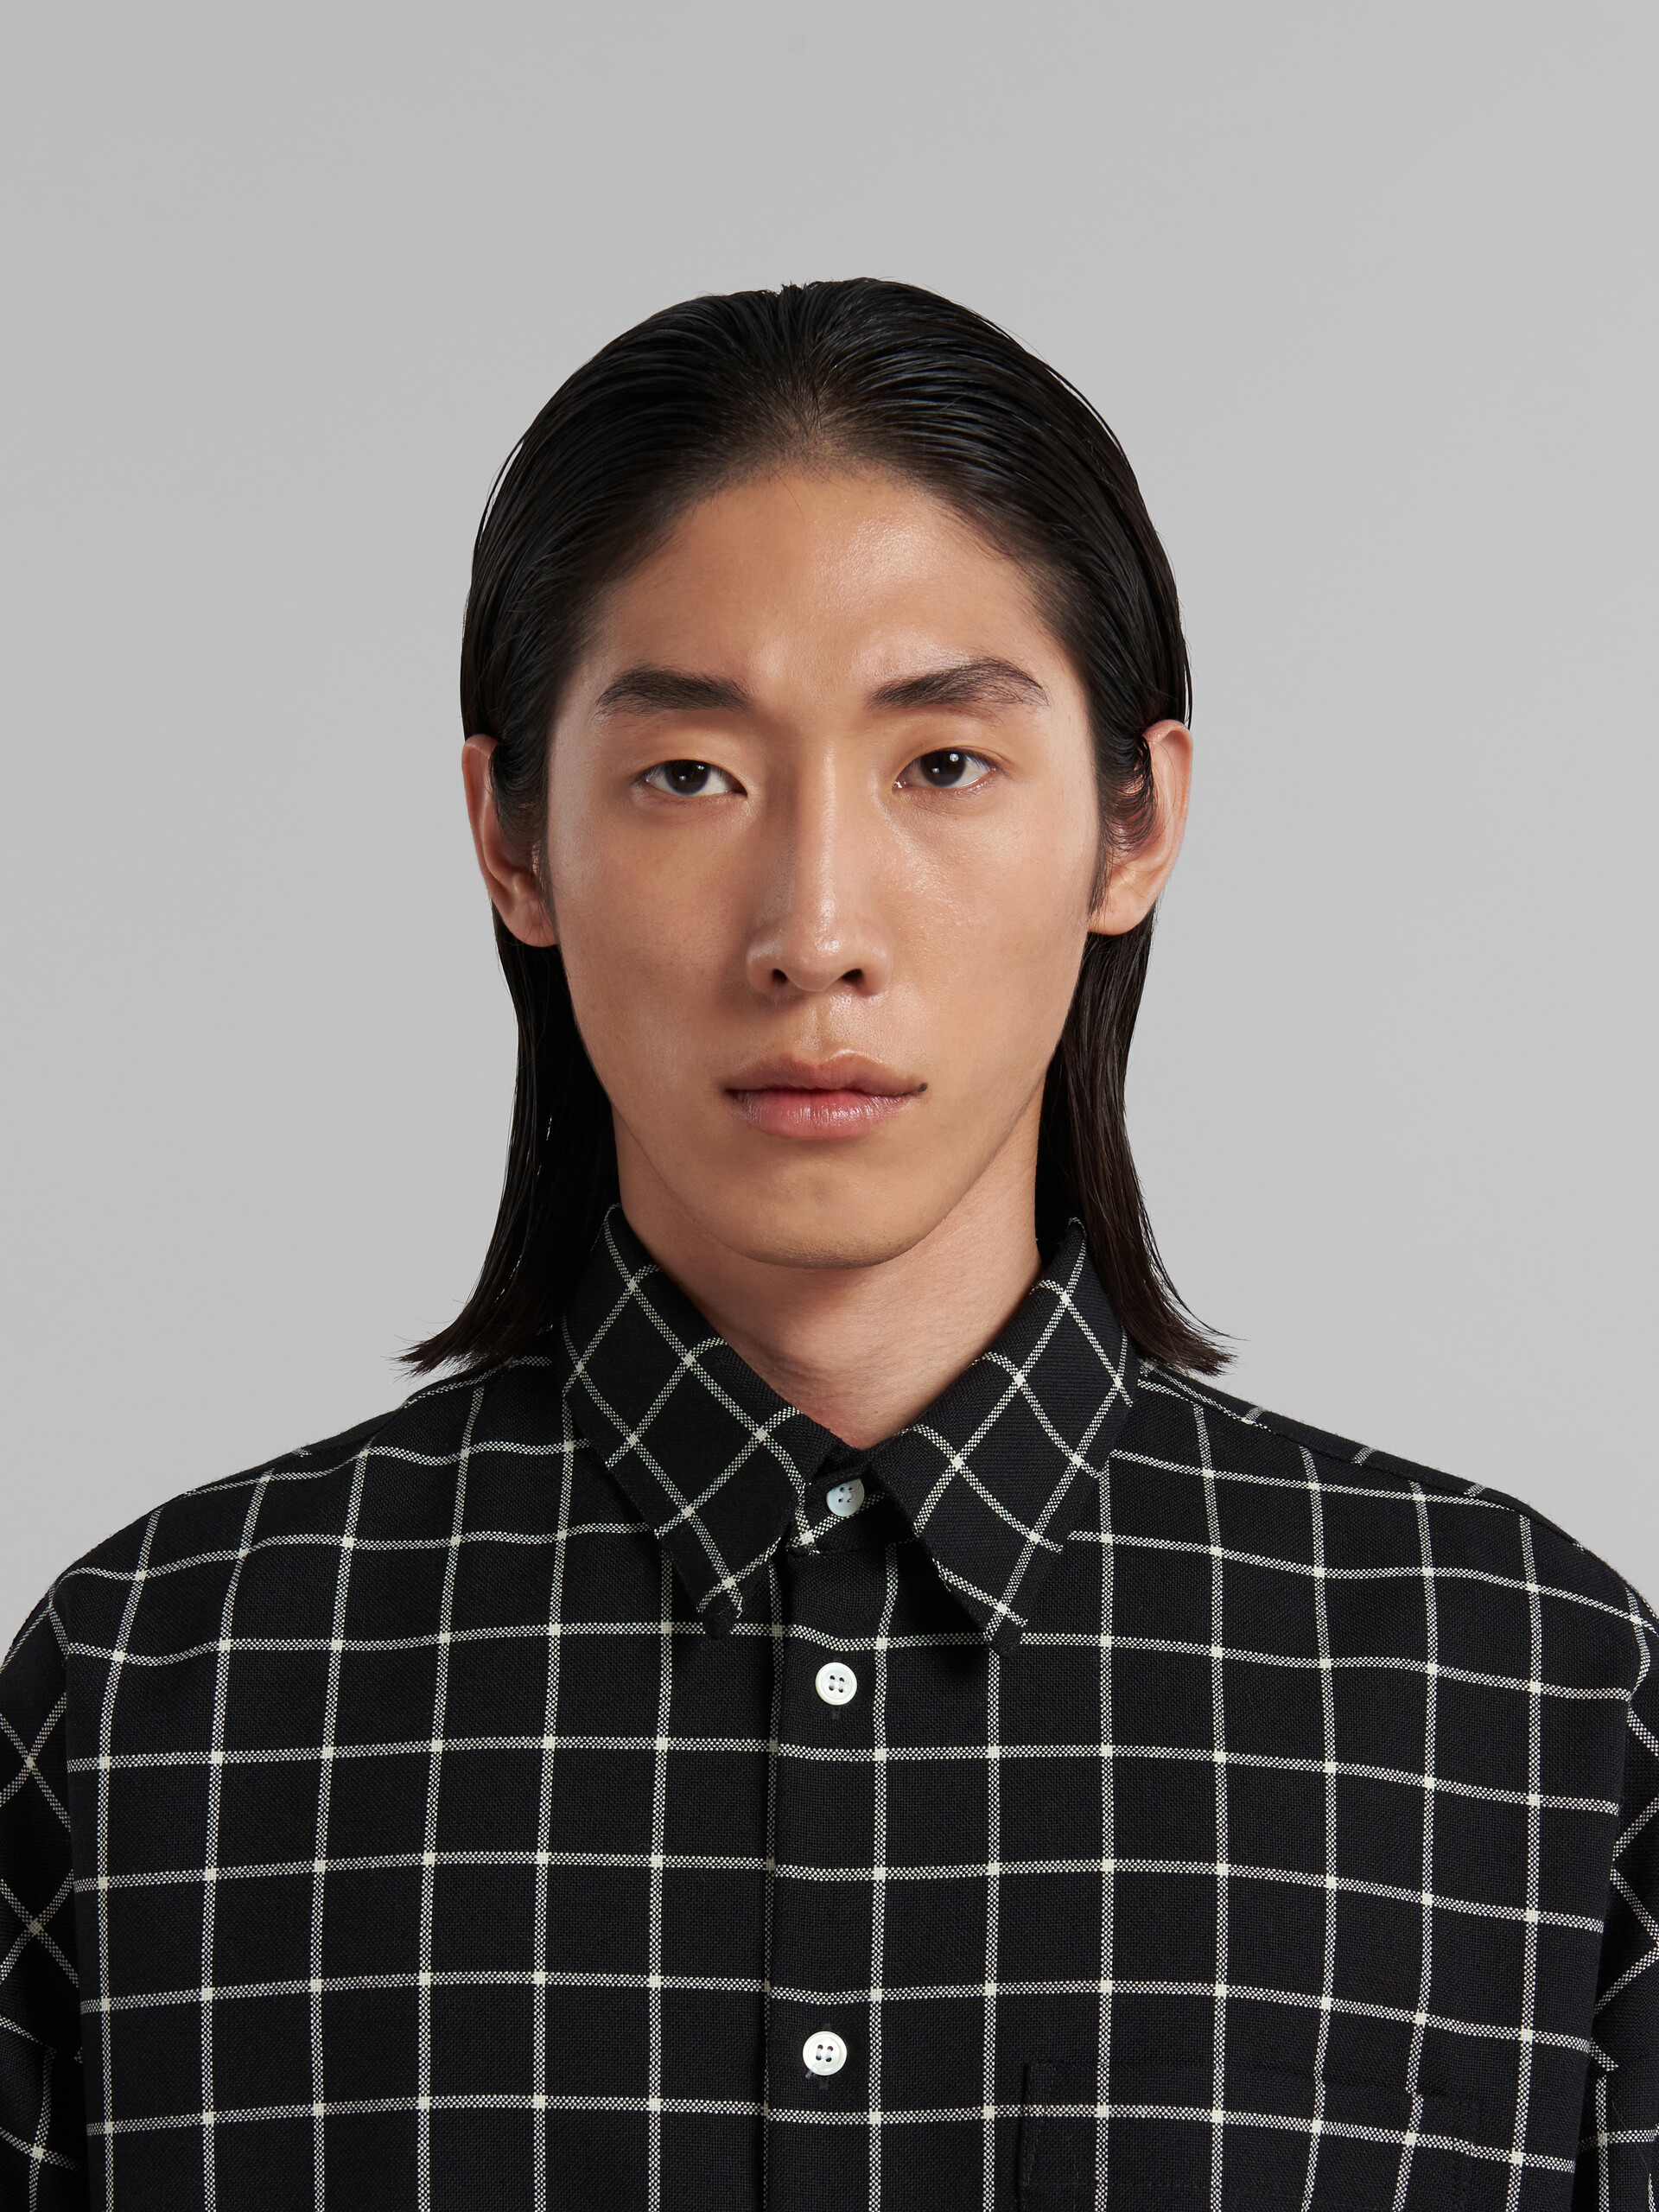 Black wool long-sleeved shirt with checked pattern